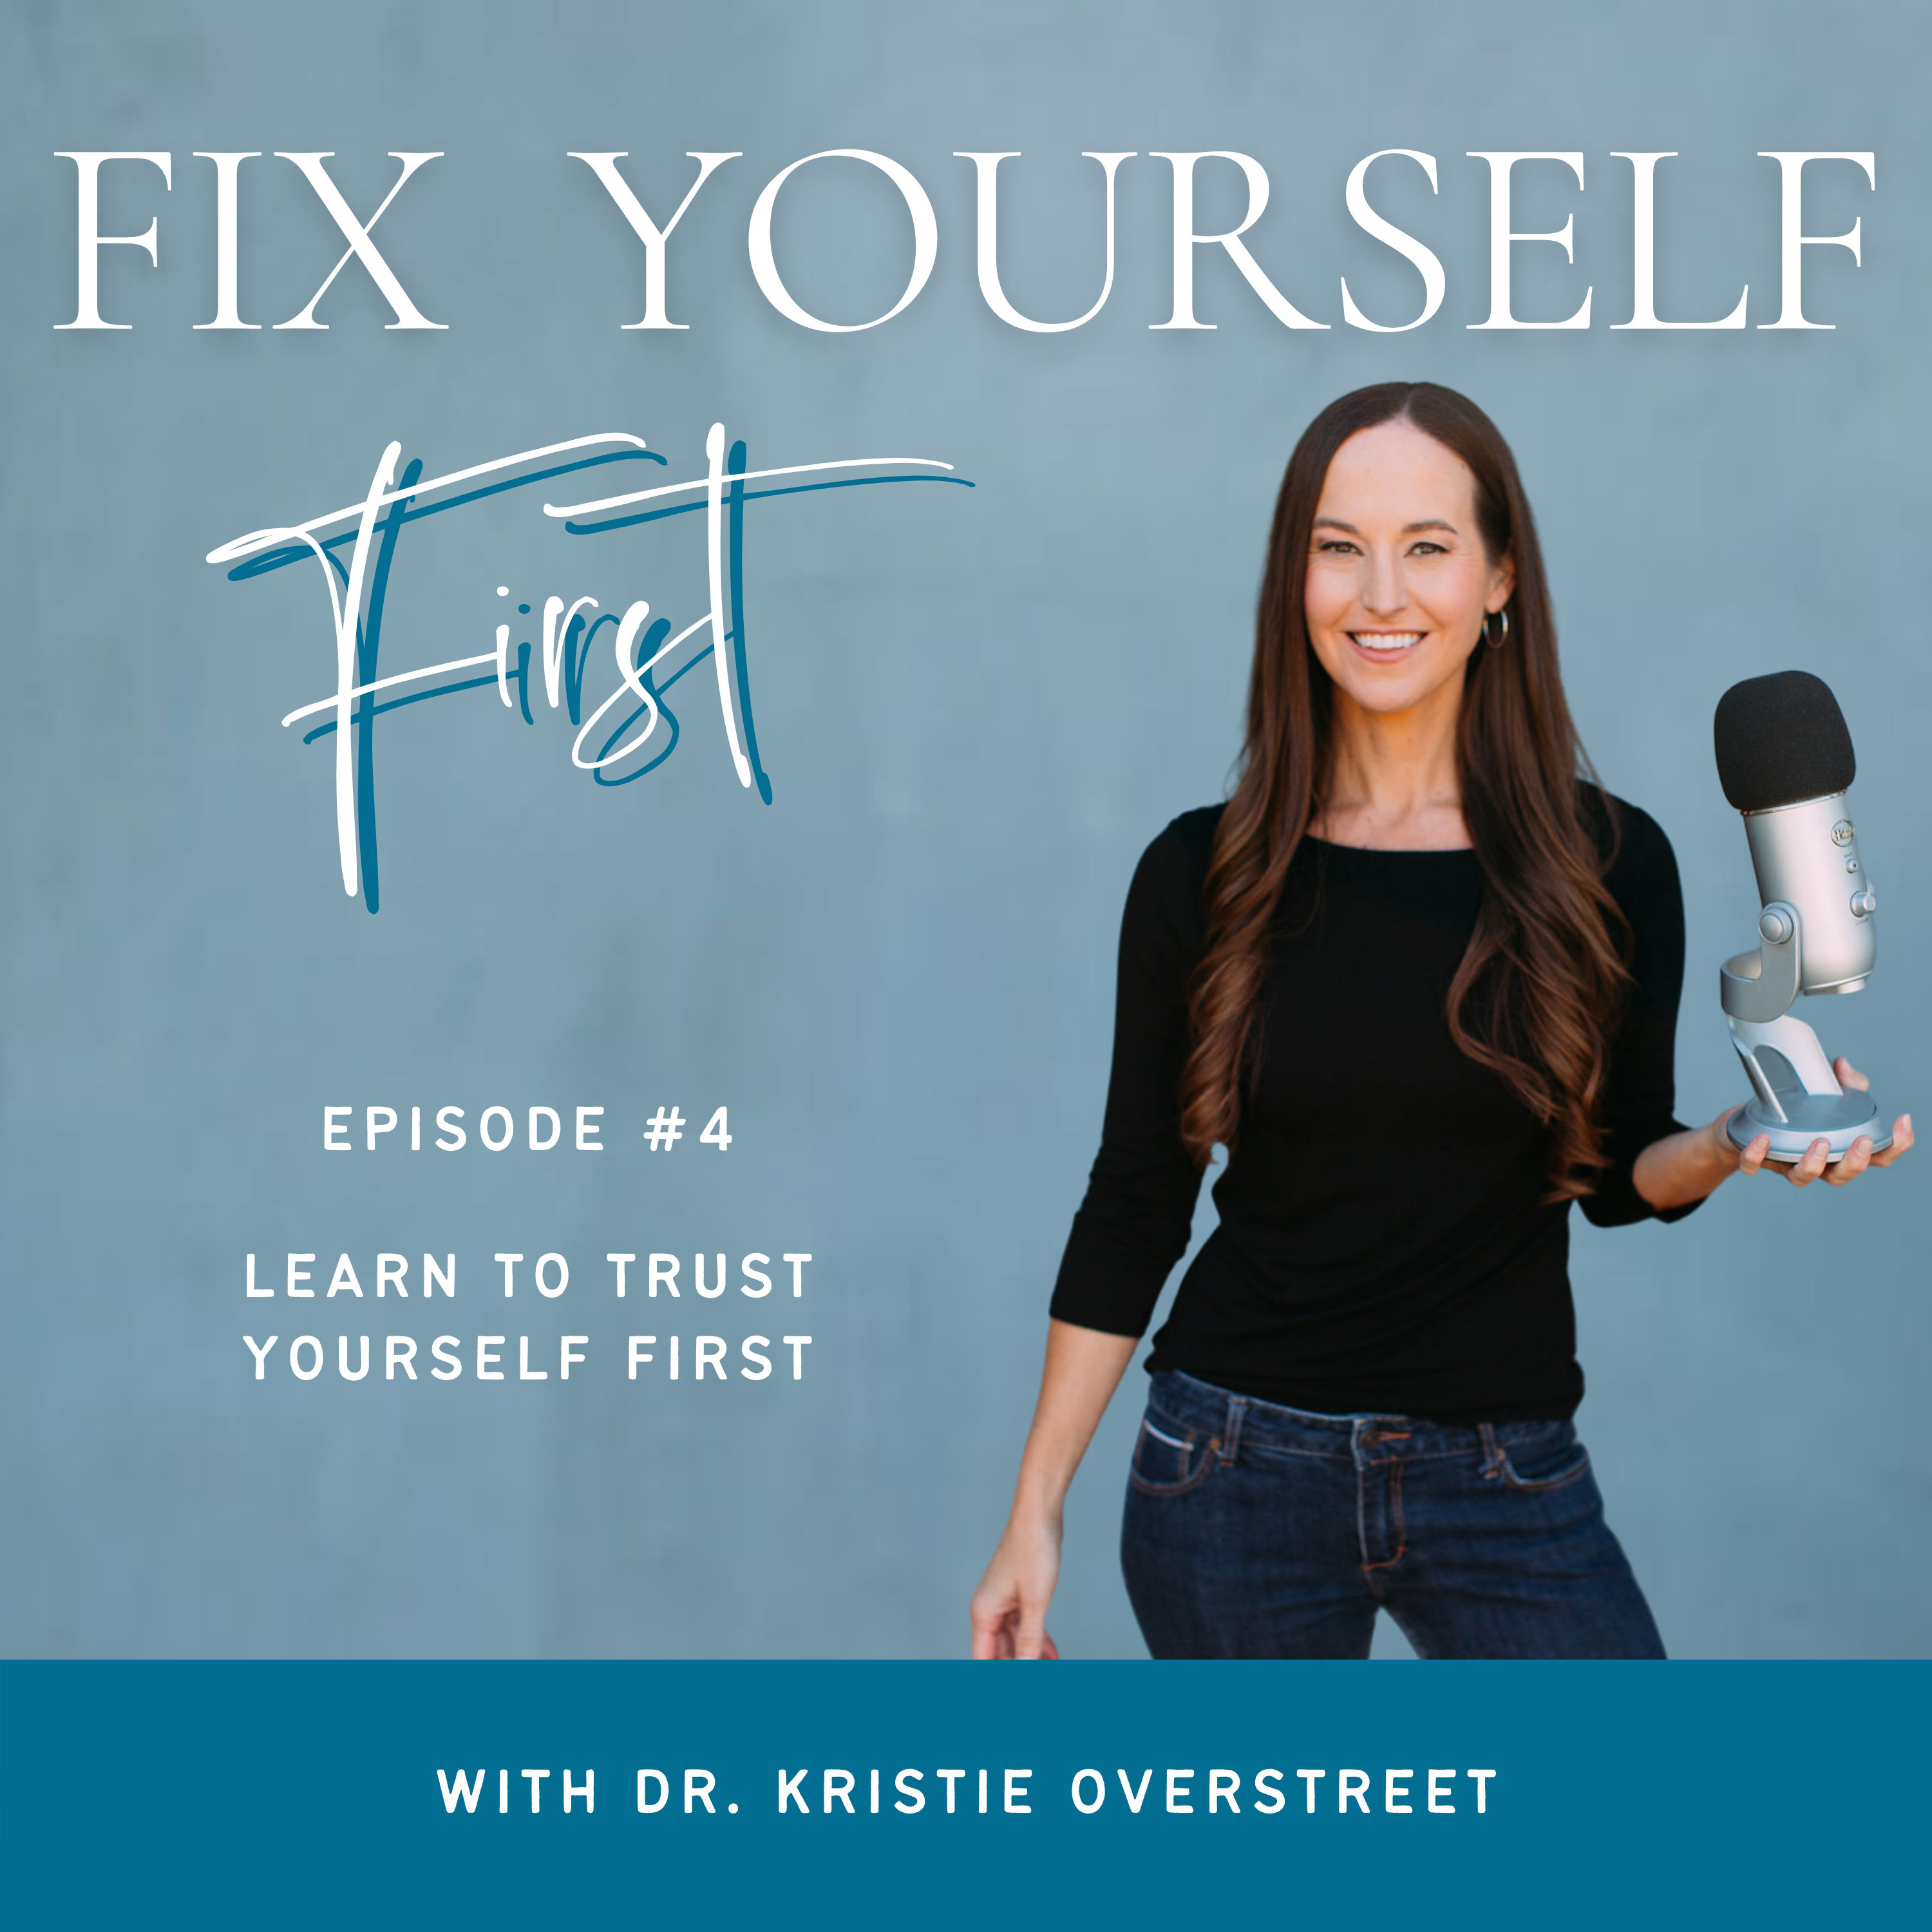 Fix Yourself First - Episode 4